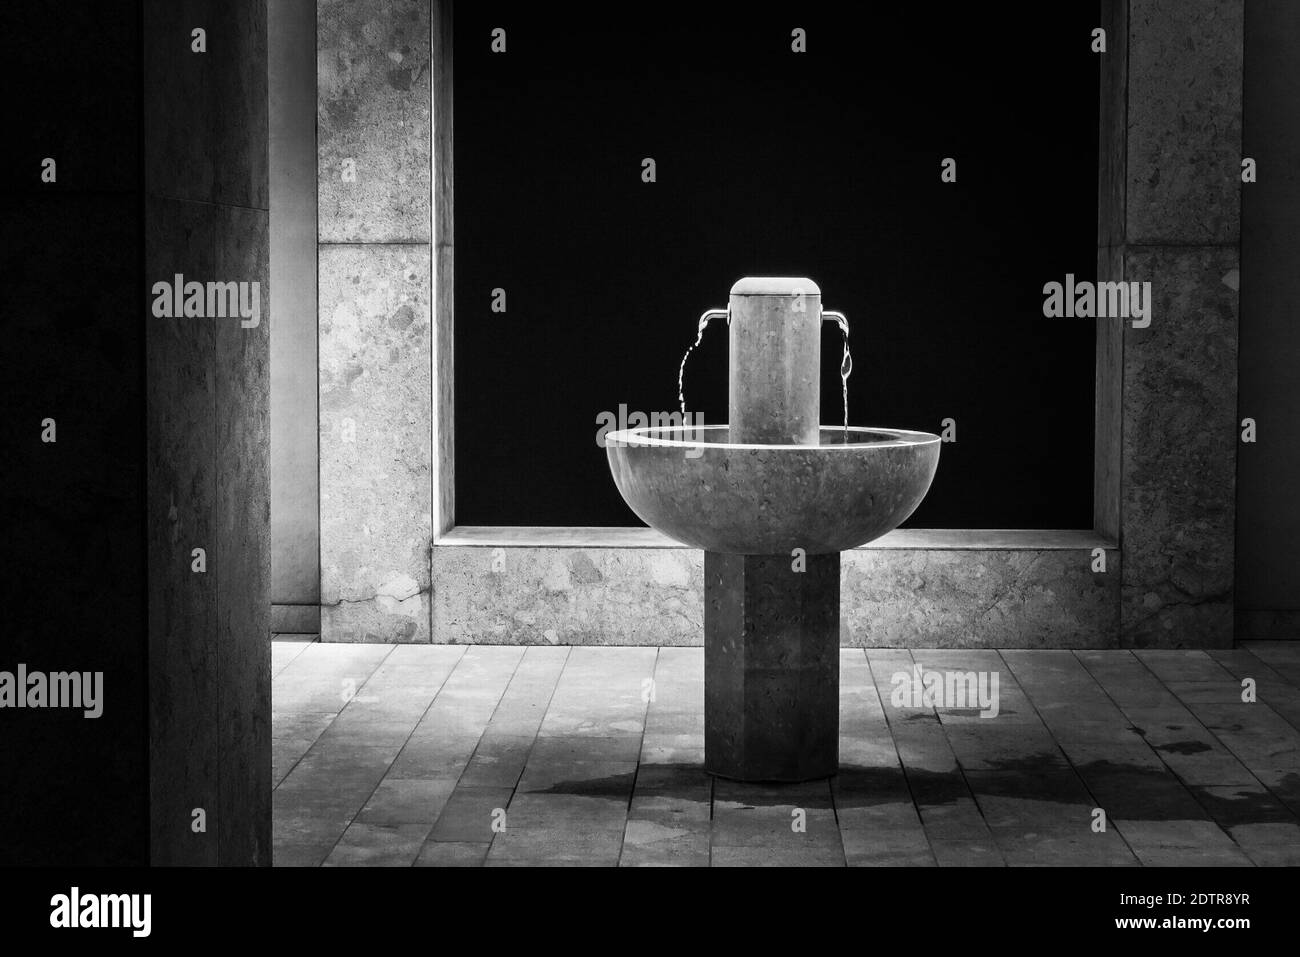 Fountain On Tiled Floor Against Wall In Building Stock Photo